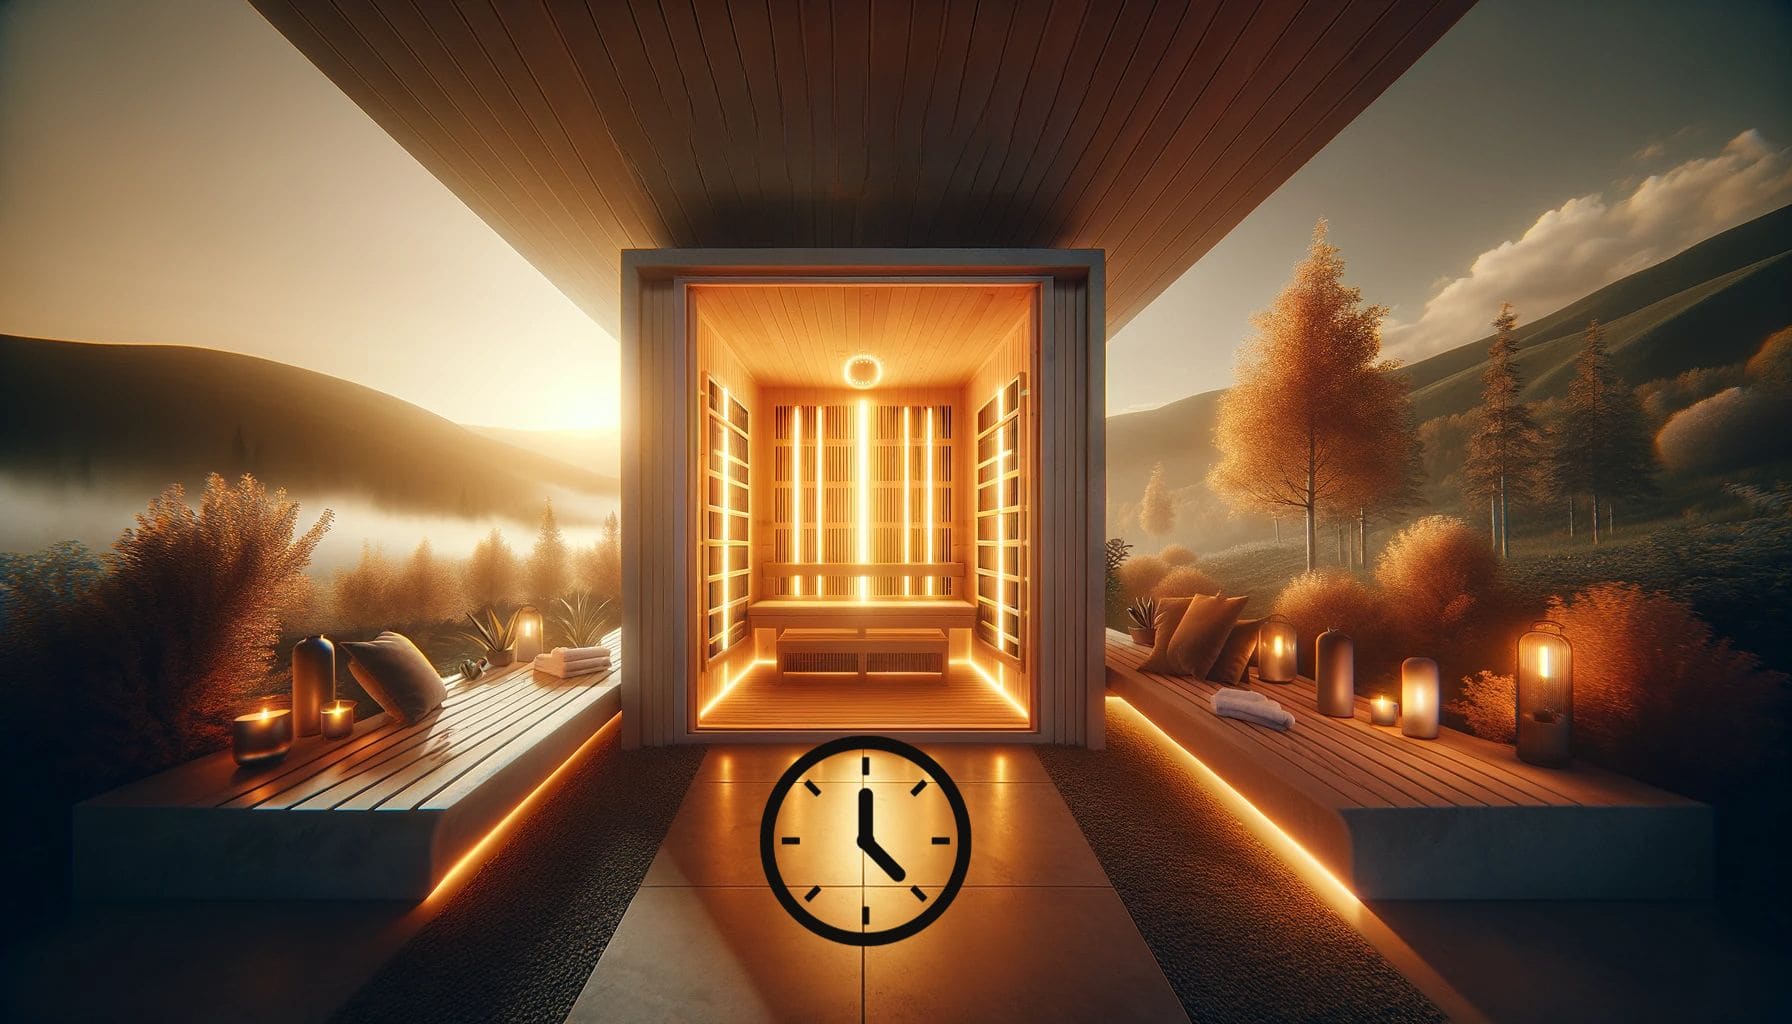 How Long Should You Stay in an Infrared Sauna for Maximum Health Benefits? - Heracles Wellness